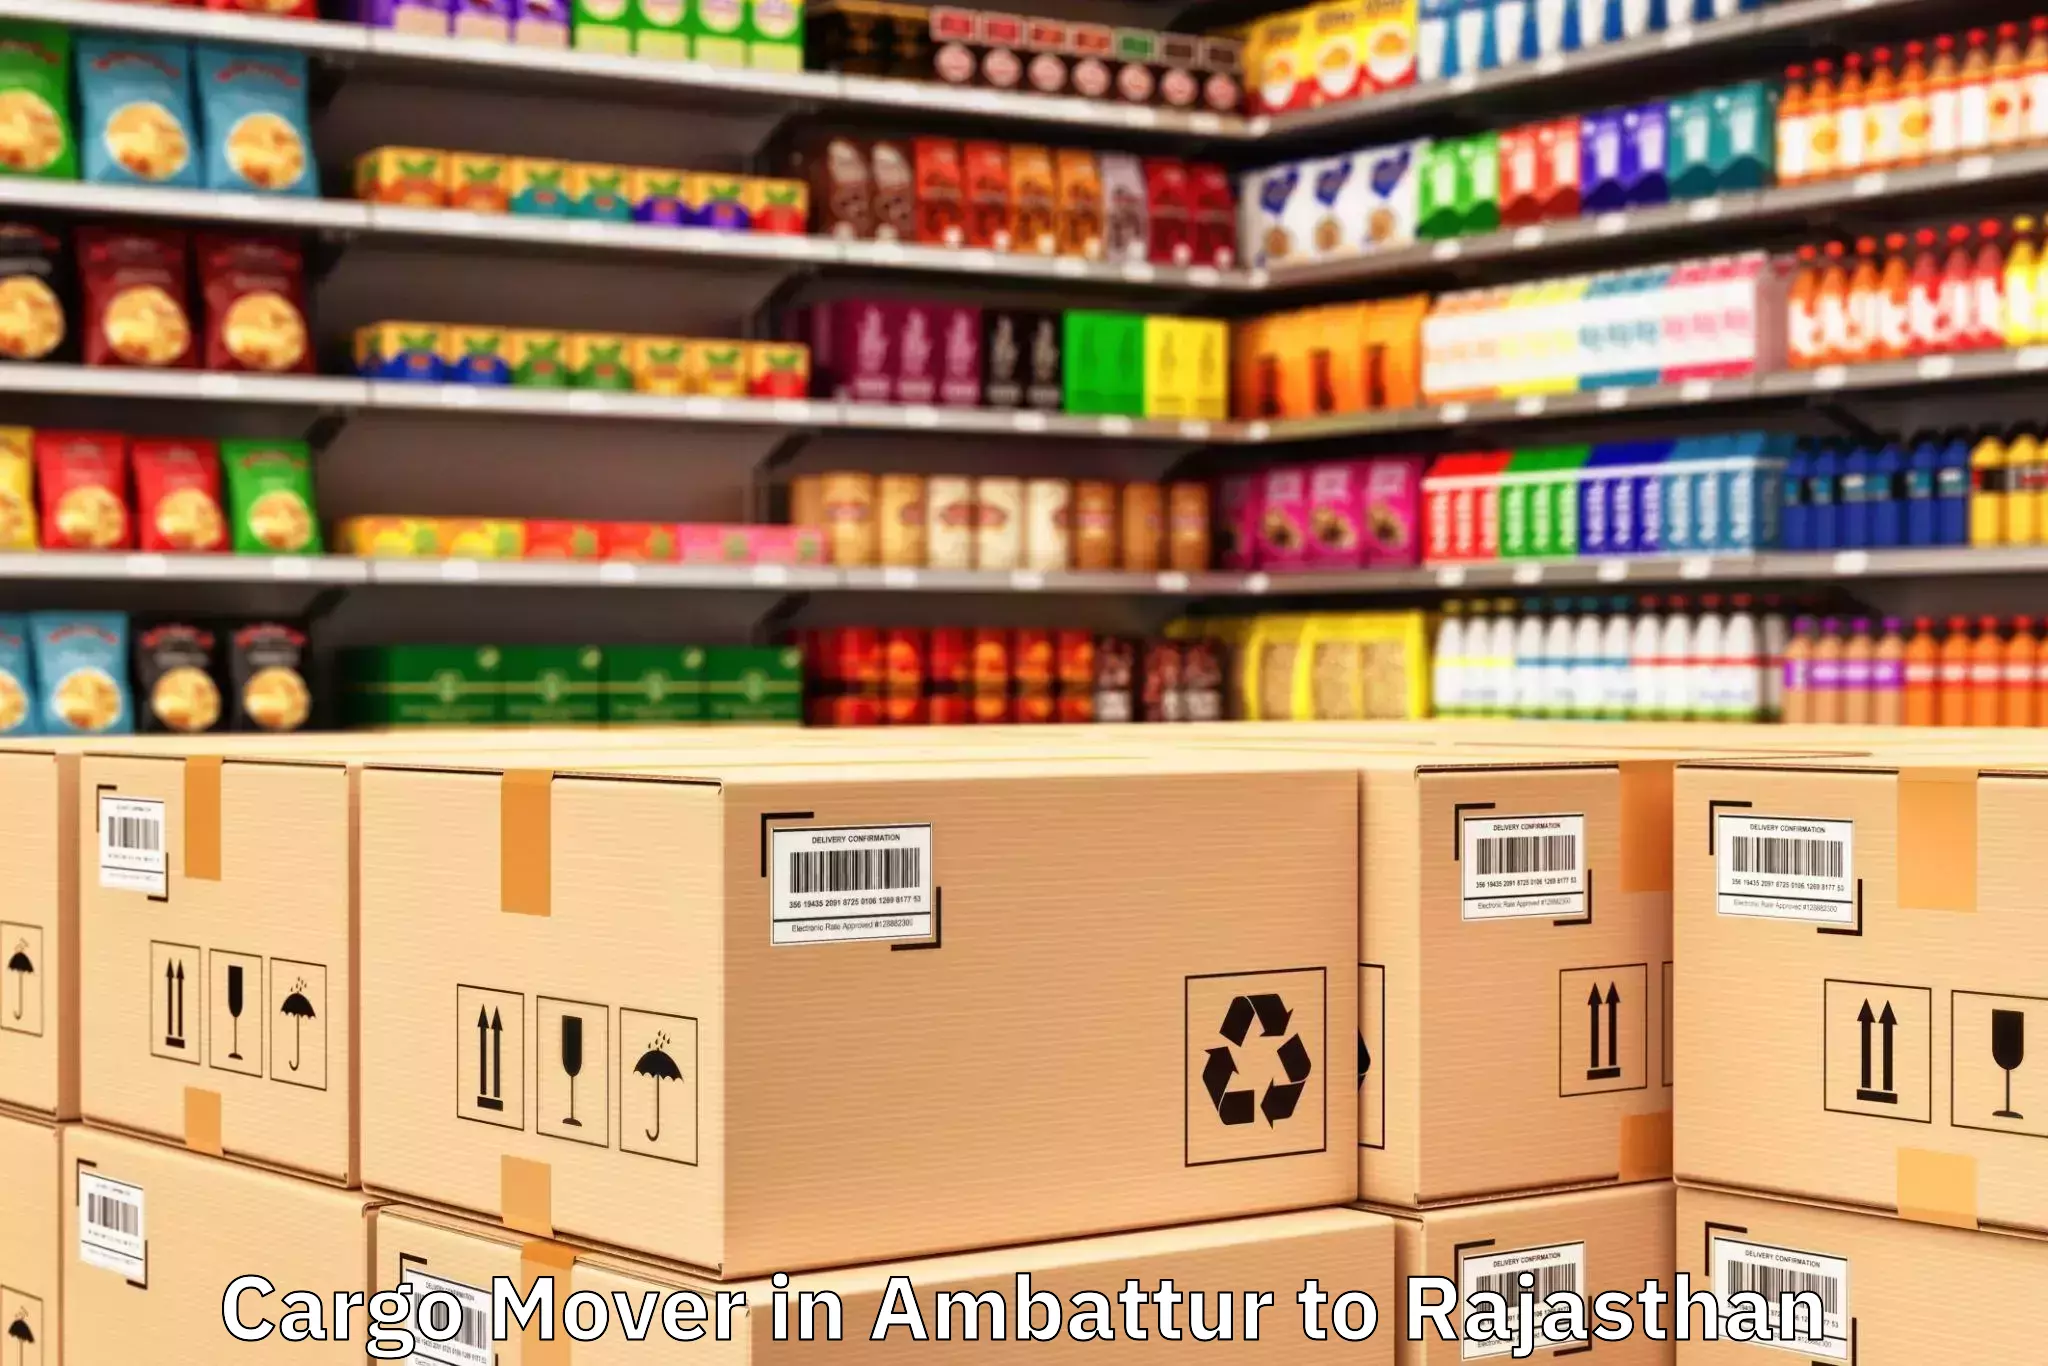 Trusted Ambattur to Rajasthan Cargo Mover